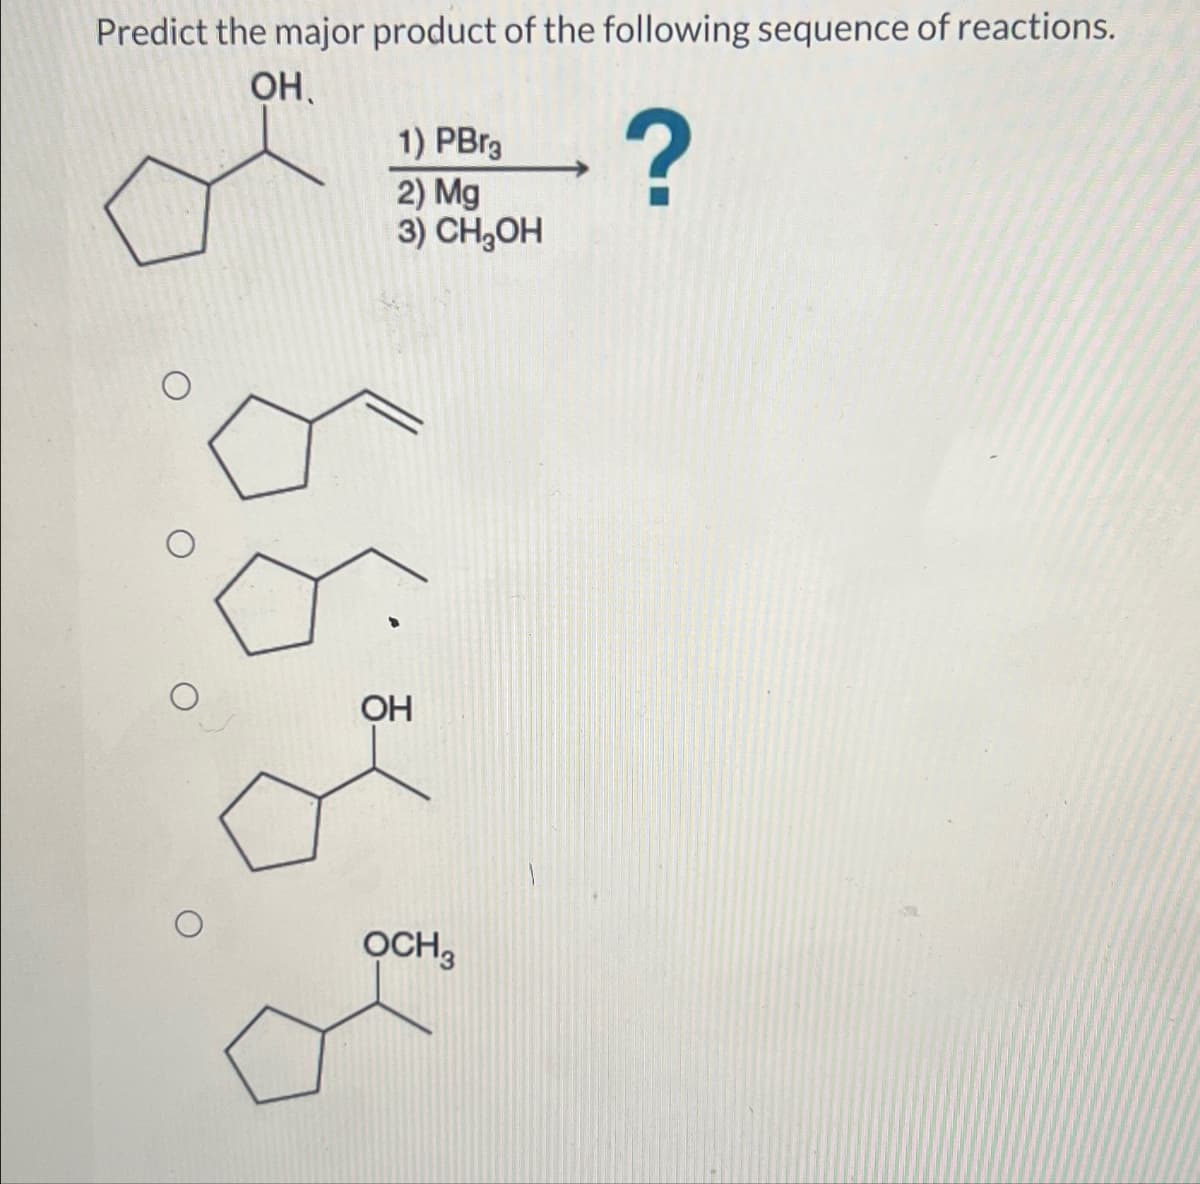 Predict the major product of the following sequence of reactions.
OH
1) PBгg
2) Mg
?
3) CH₂OH
OH
OCH3